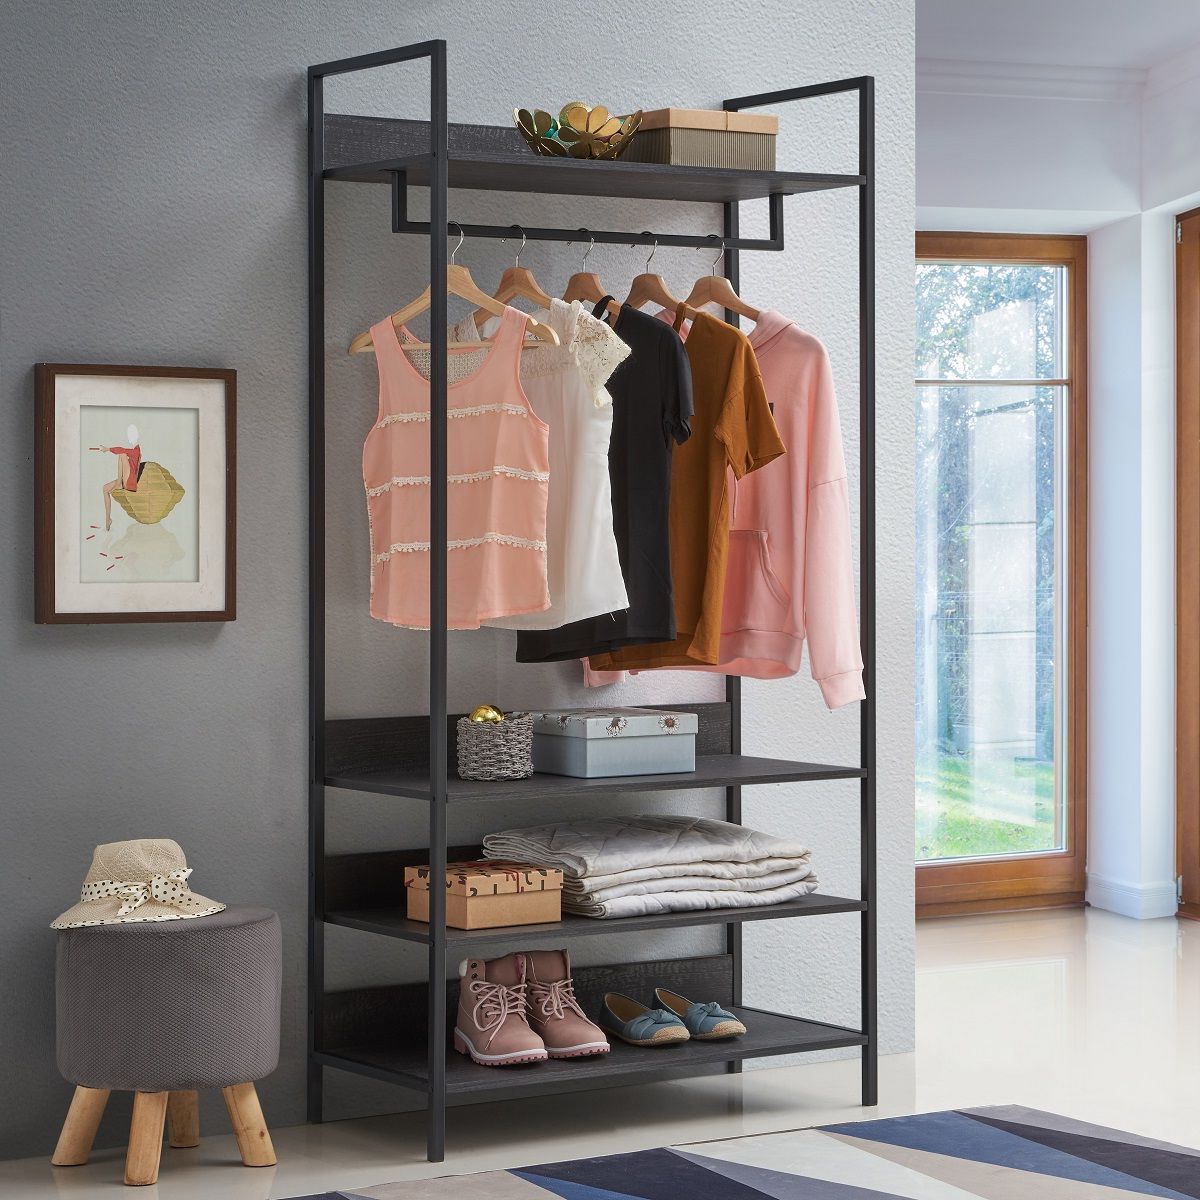 4 Shelf Closet Wardrobes Intended For Newest Open Wardrobe With 4 Shelves (Photo 5 of 10)